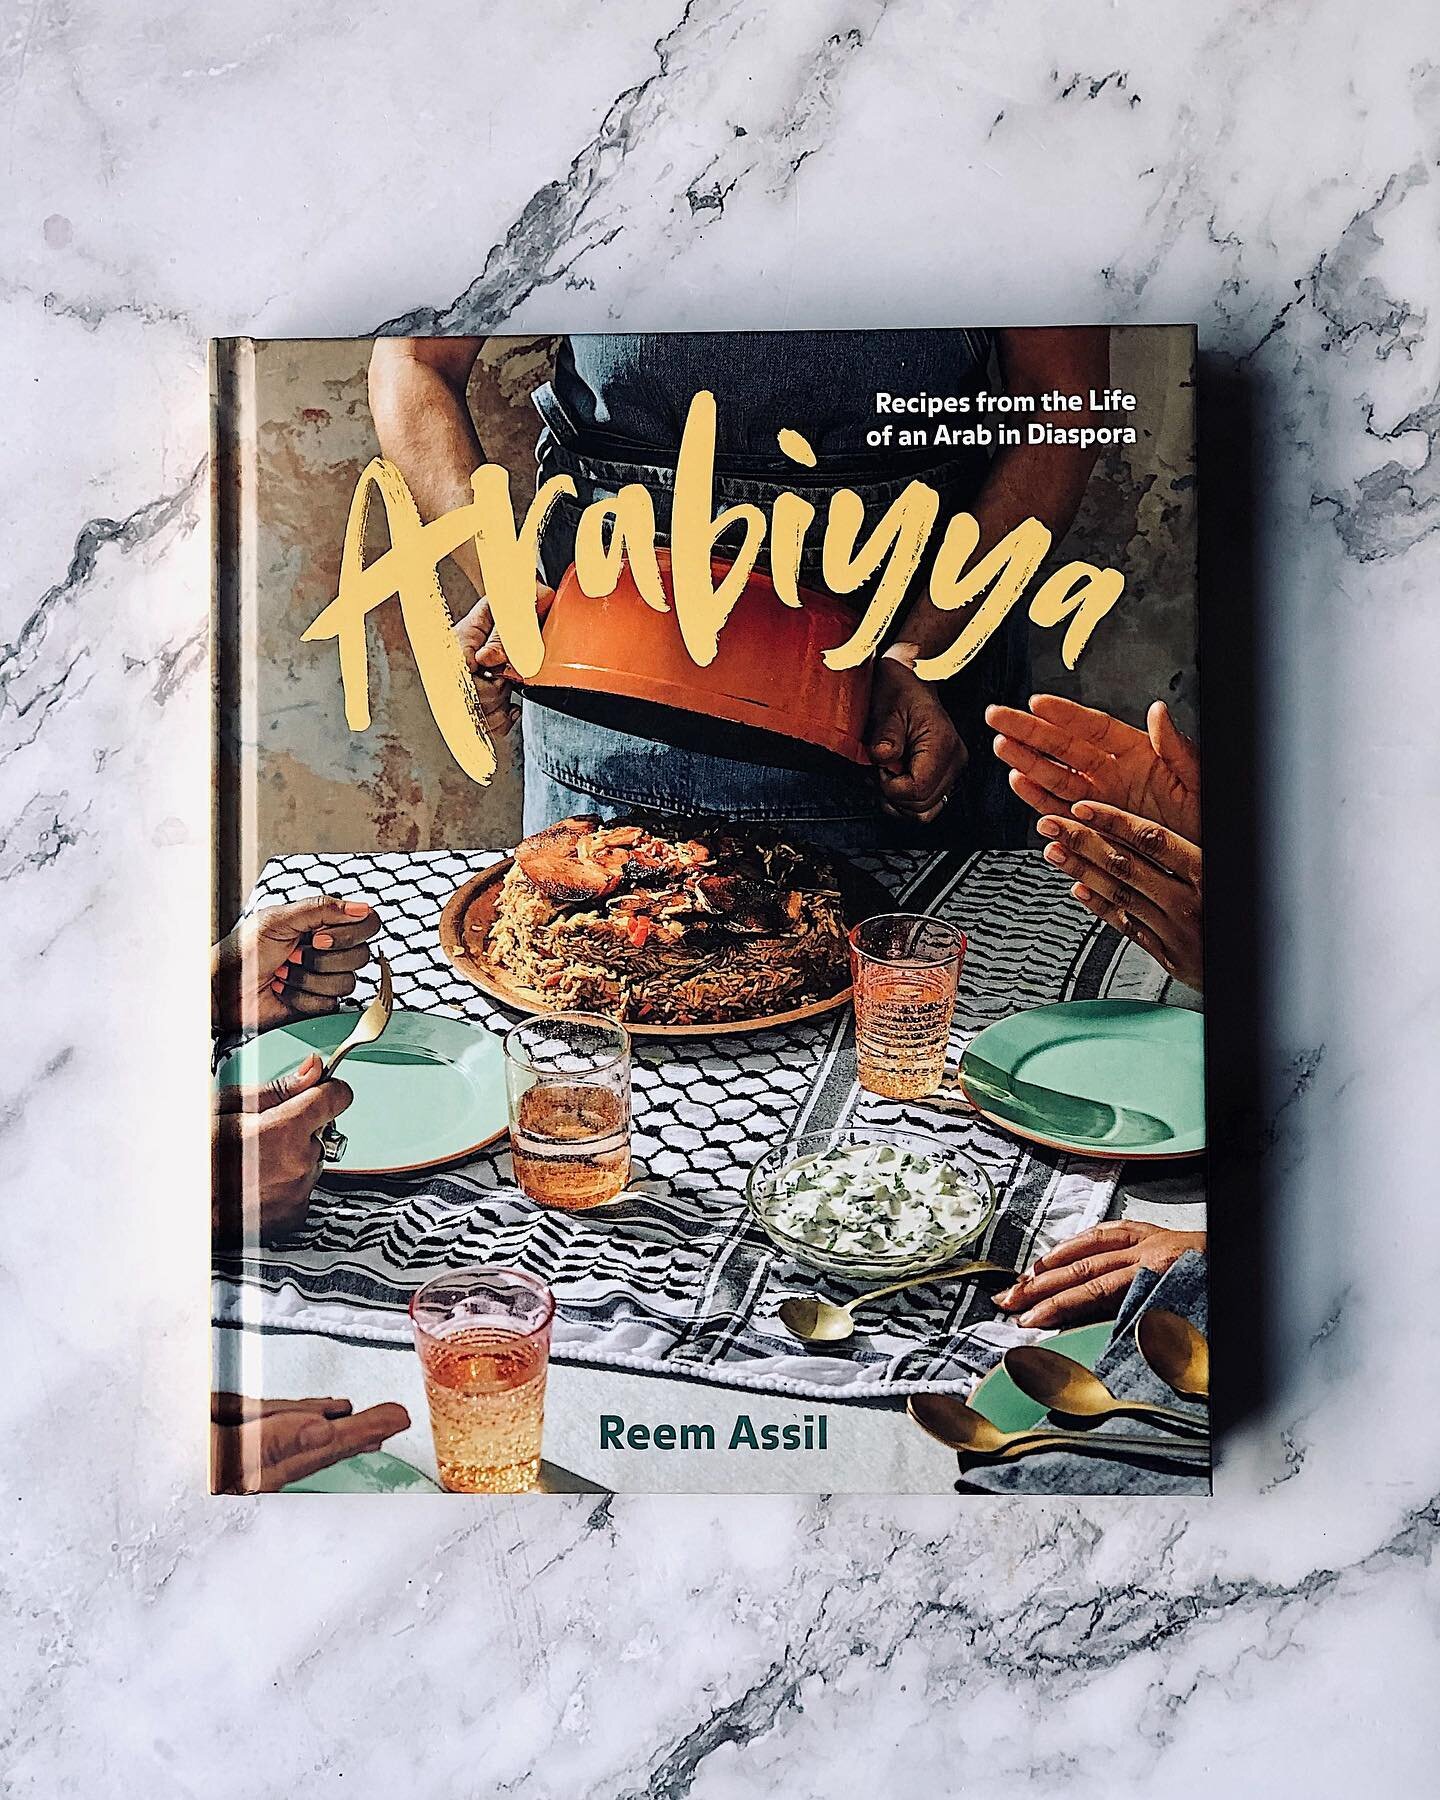 Our next cookbook club event is coming up on February 22! We will be cooking from @reem.assil's fabulous book - Arabiyya. Attendees will take home goodie bags with samples of the amazing @justdatesyrup, a perfect accompaniment for this book!

We only